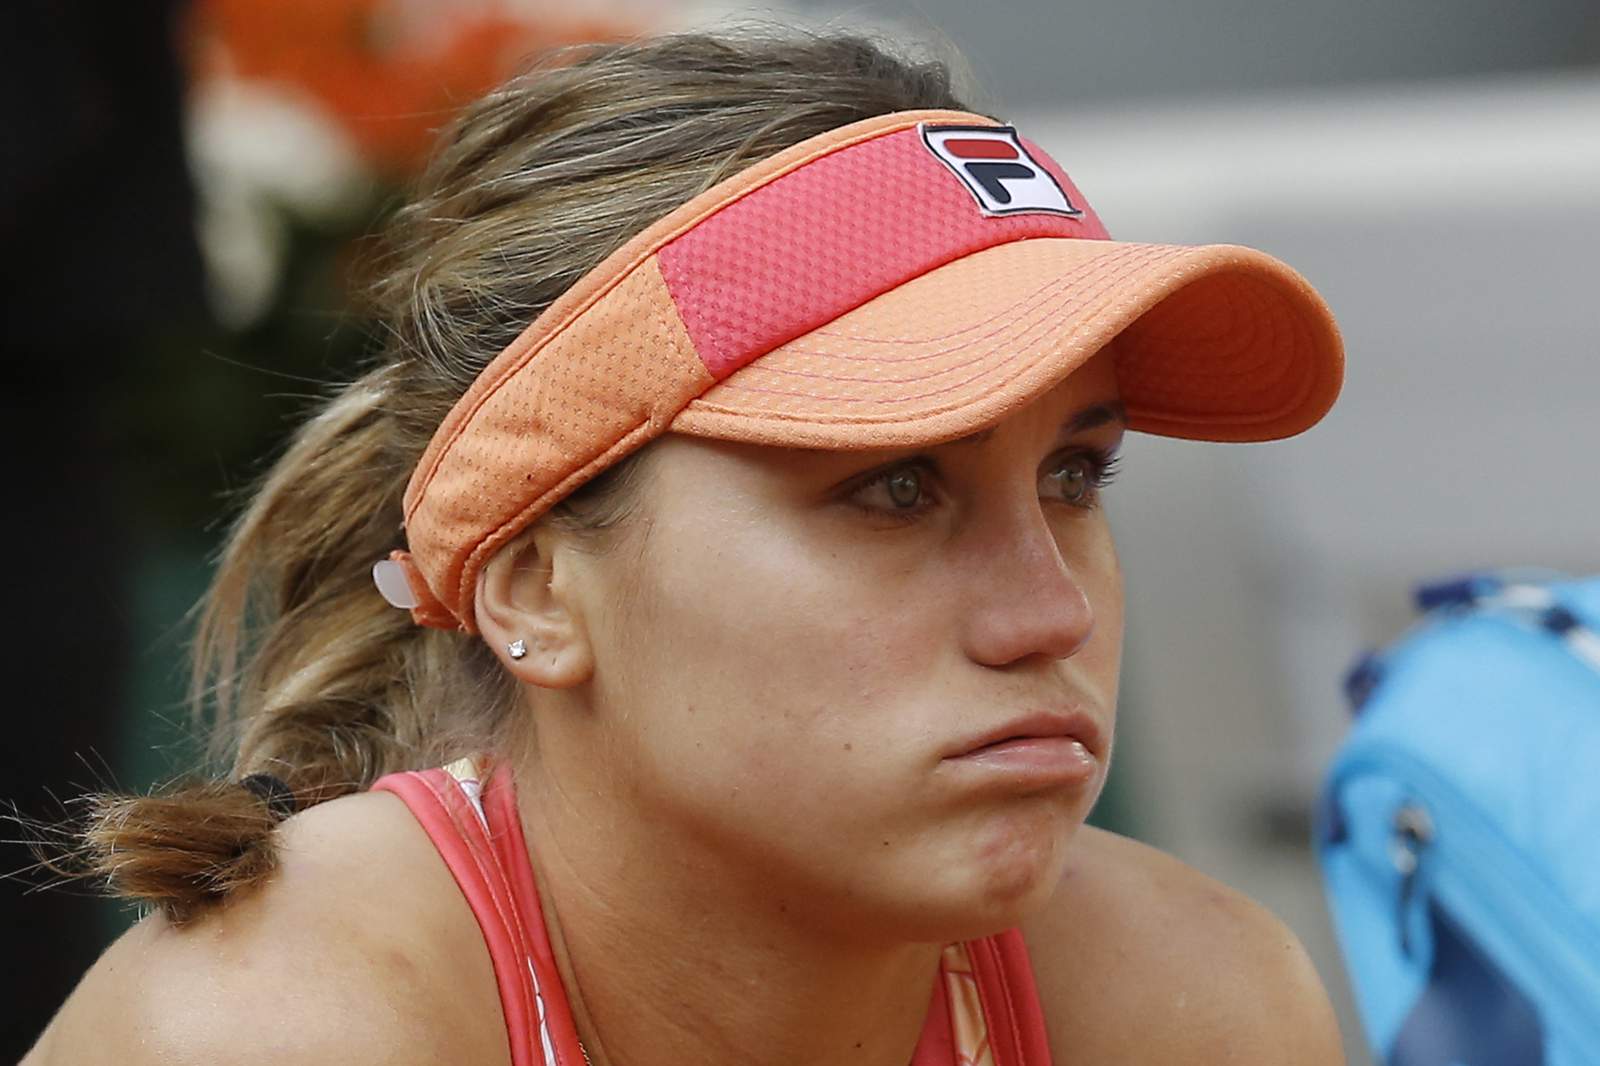 The Latest: Australian champ Kenin cries after French loss